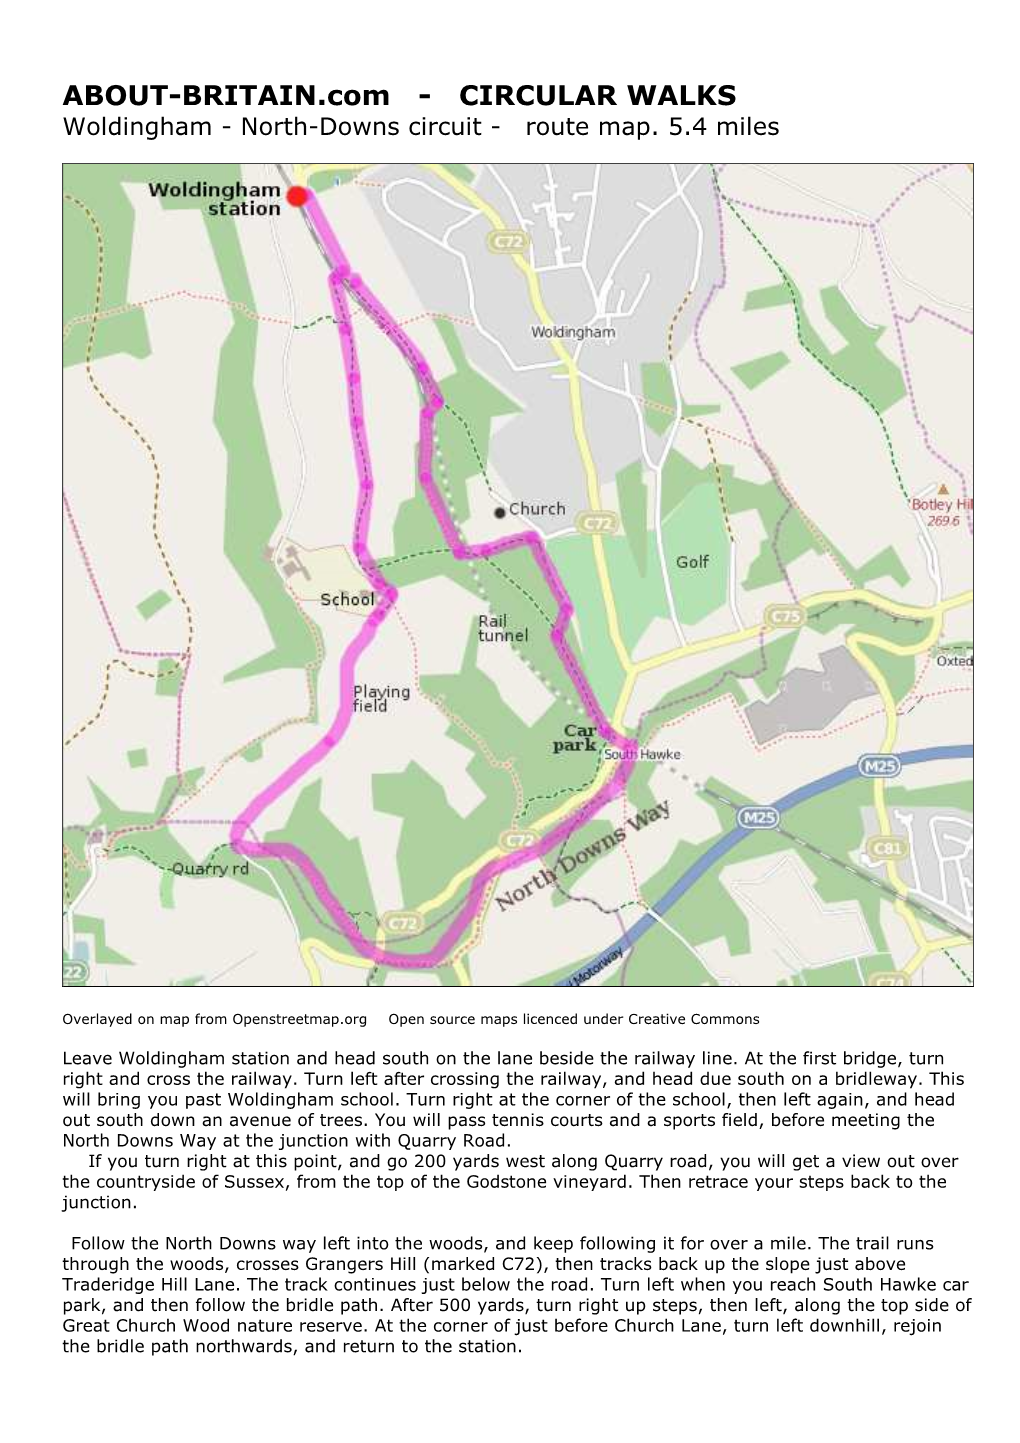 CIRCULAR WALKS Woldingham - North-Downs Circuit - Route Map